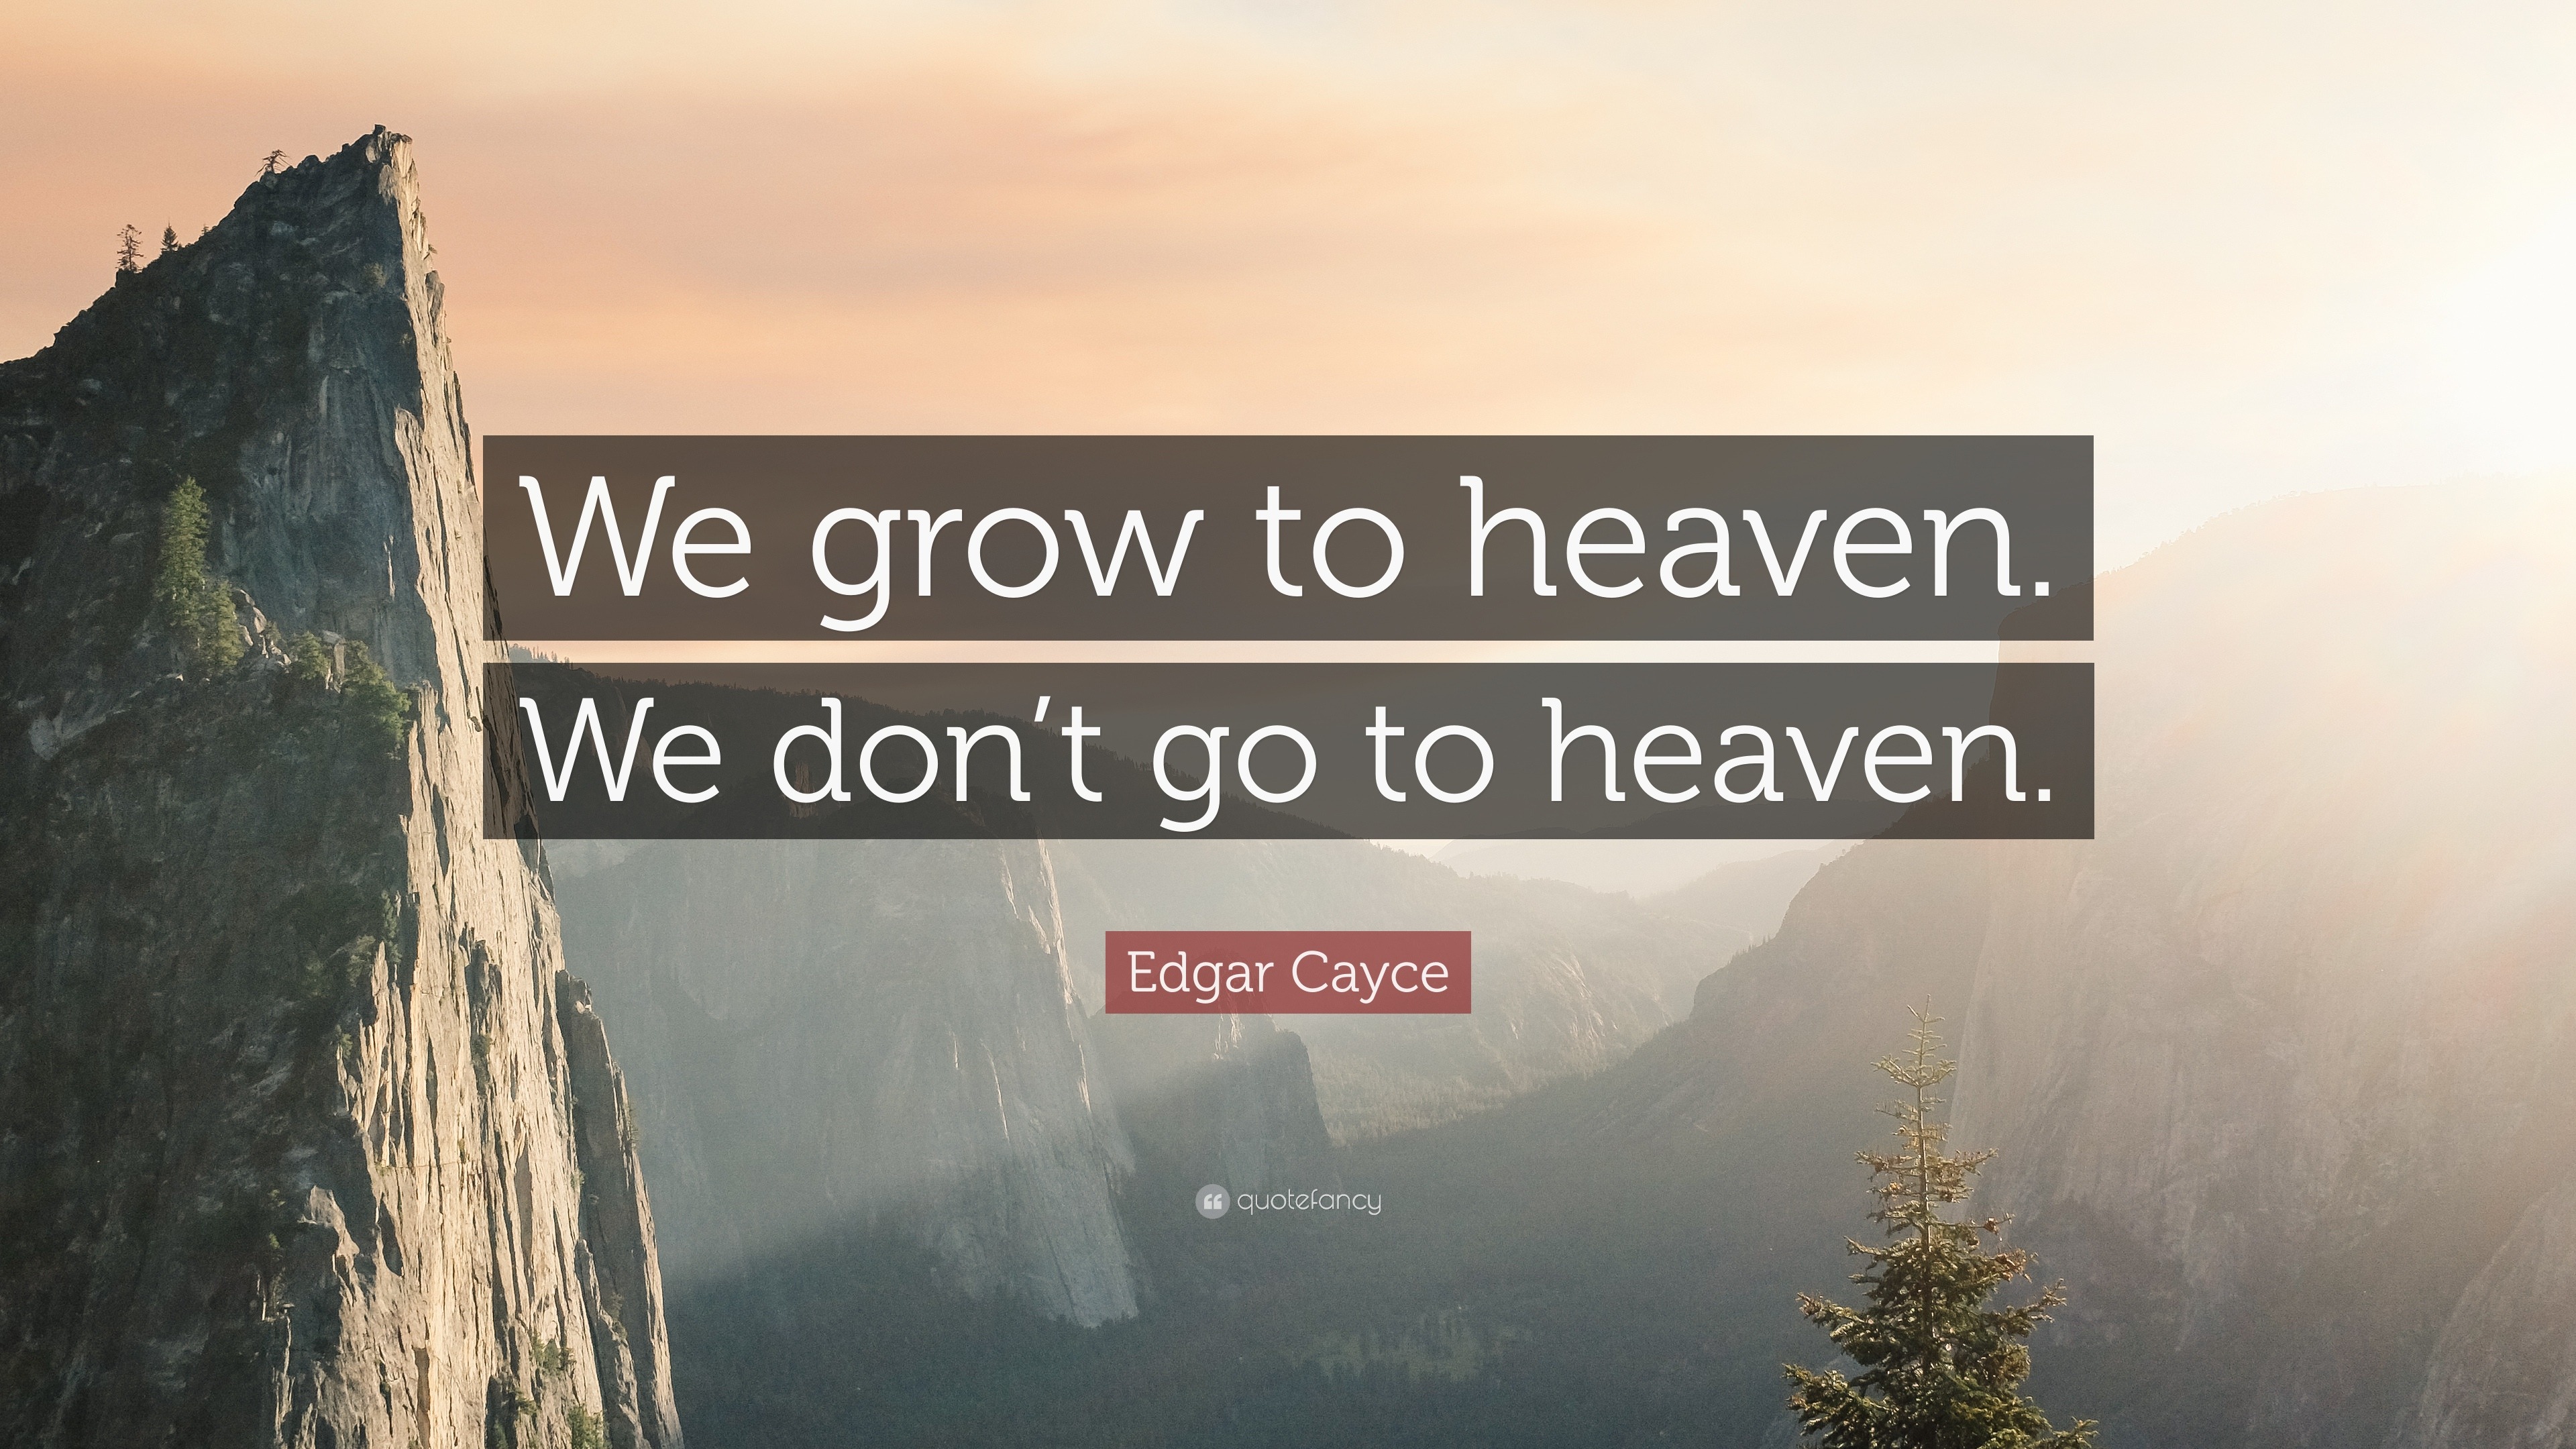 Edgar Cayce Quotes (95 wallpapers) - Quotefancy